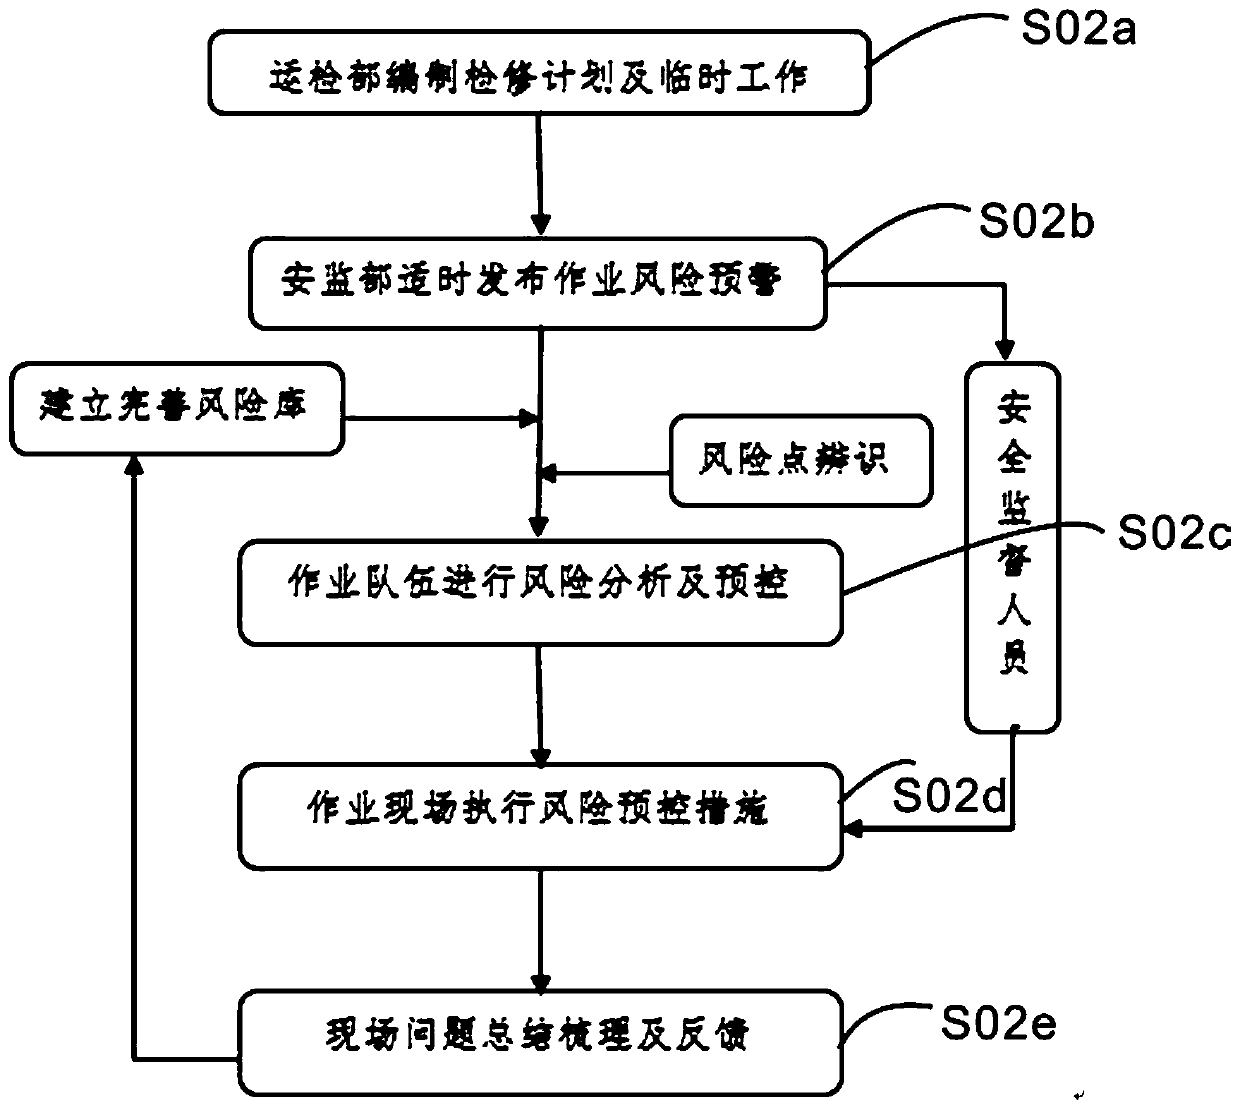 Power distribution network field operation risk management and control method